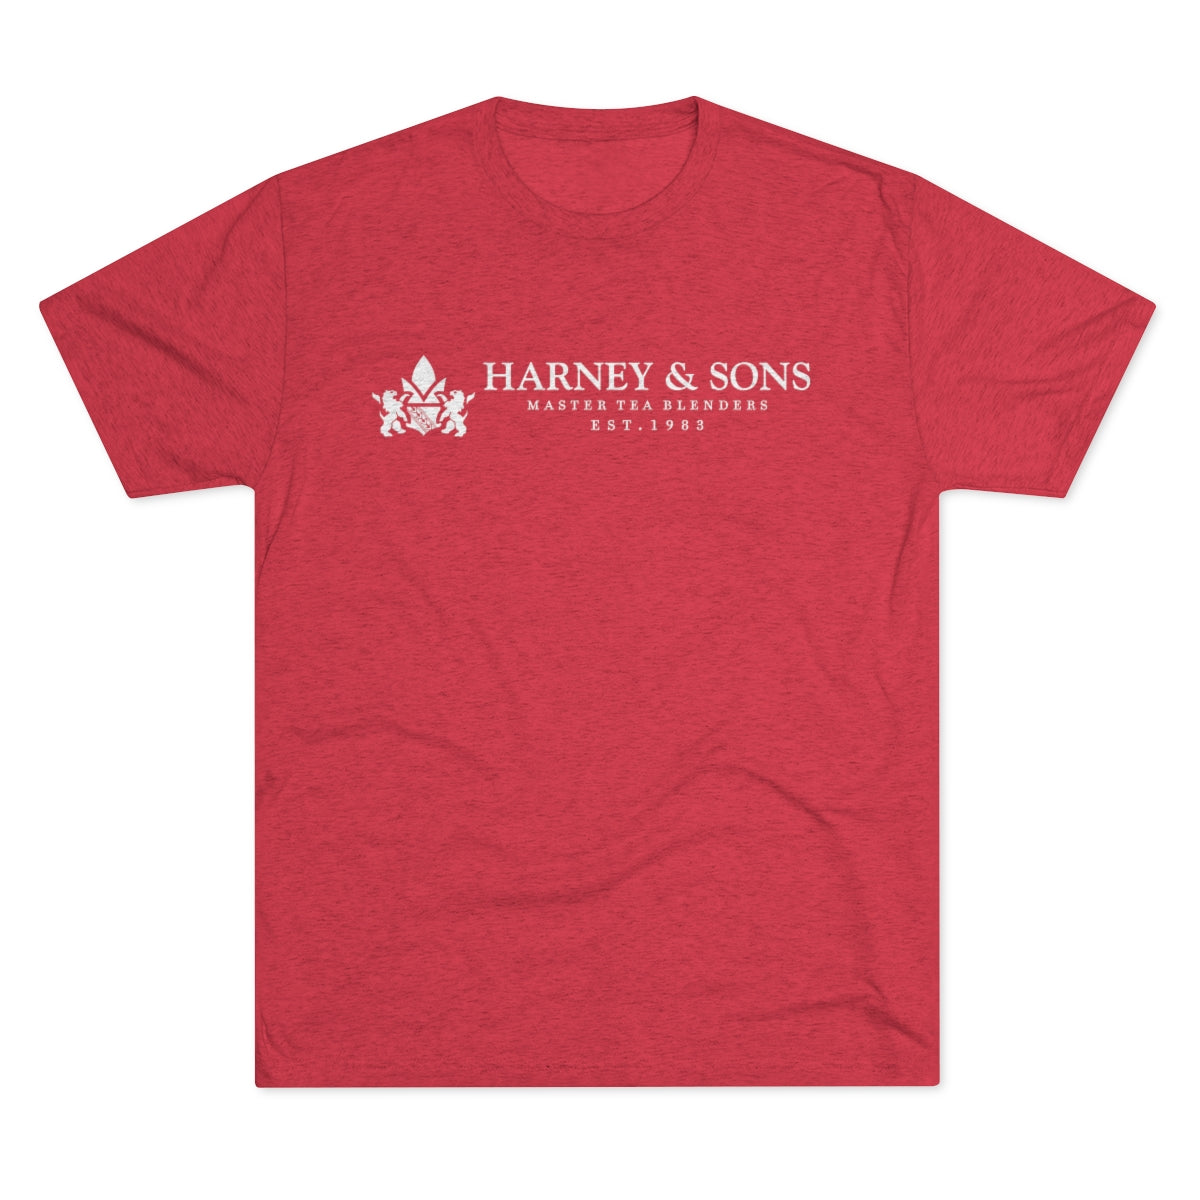 Harney & Sons - Est. 1983 Graphic Tee - Tri-Blend Vintage Red S - Harney & Sons Fine Teas